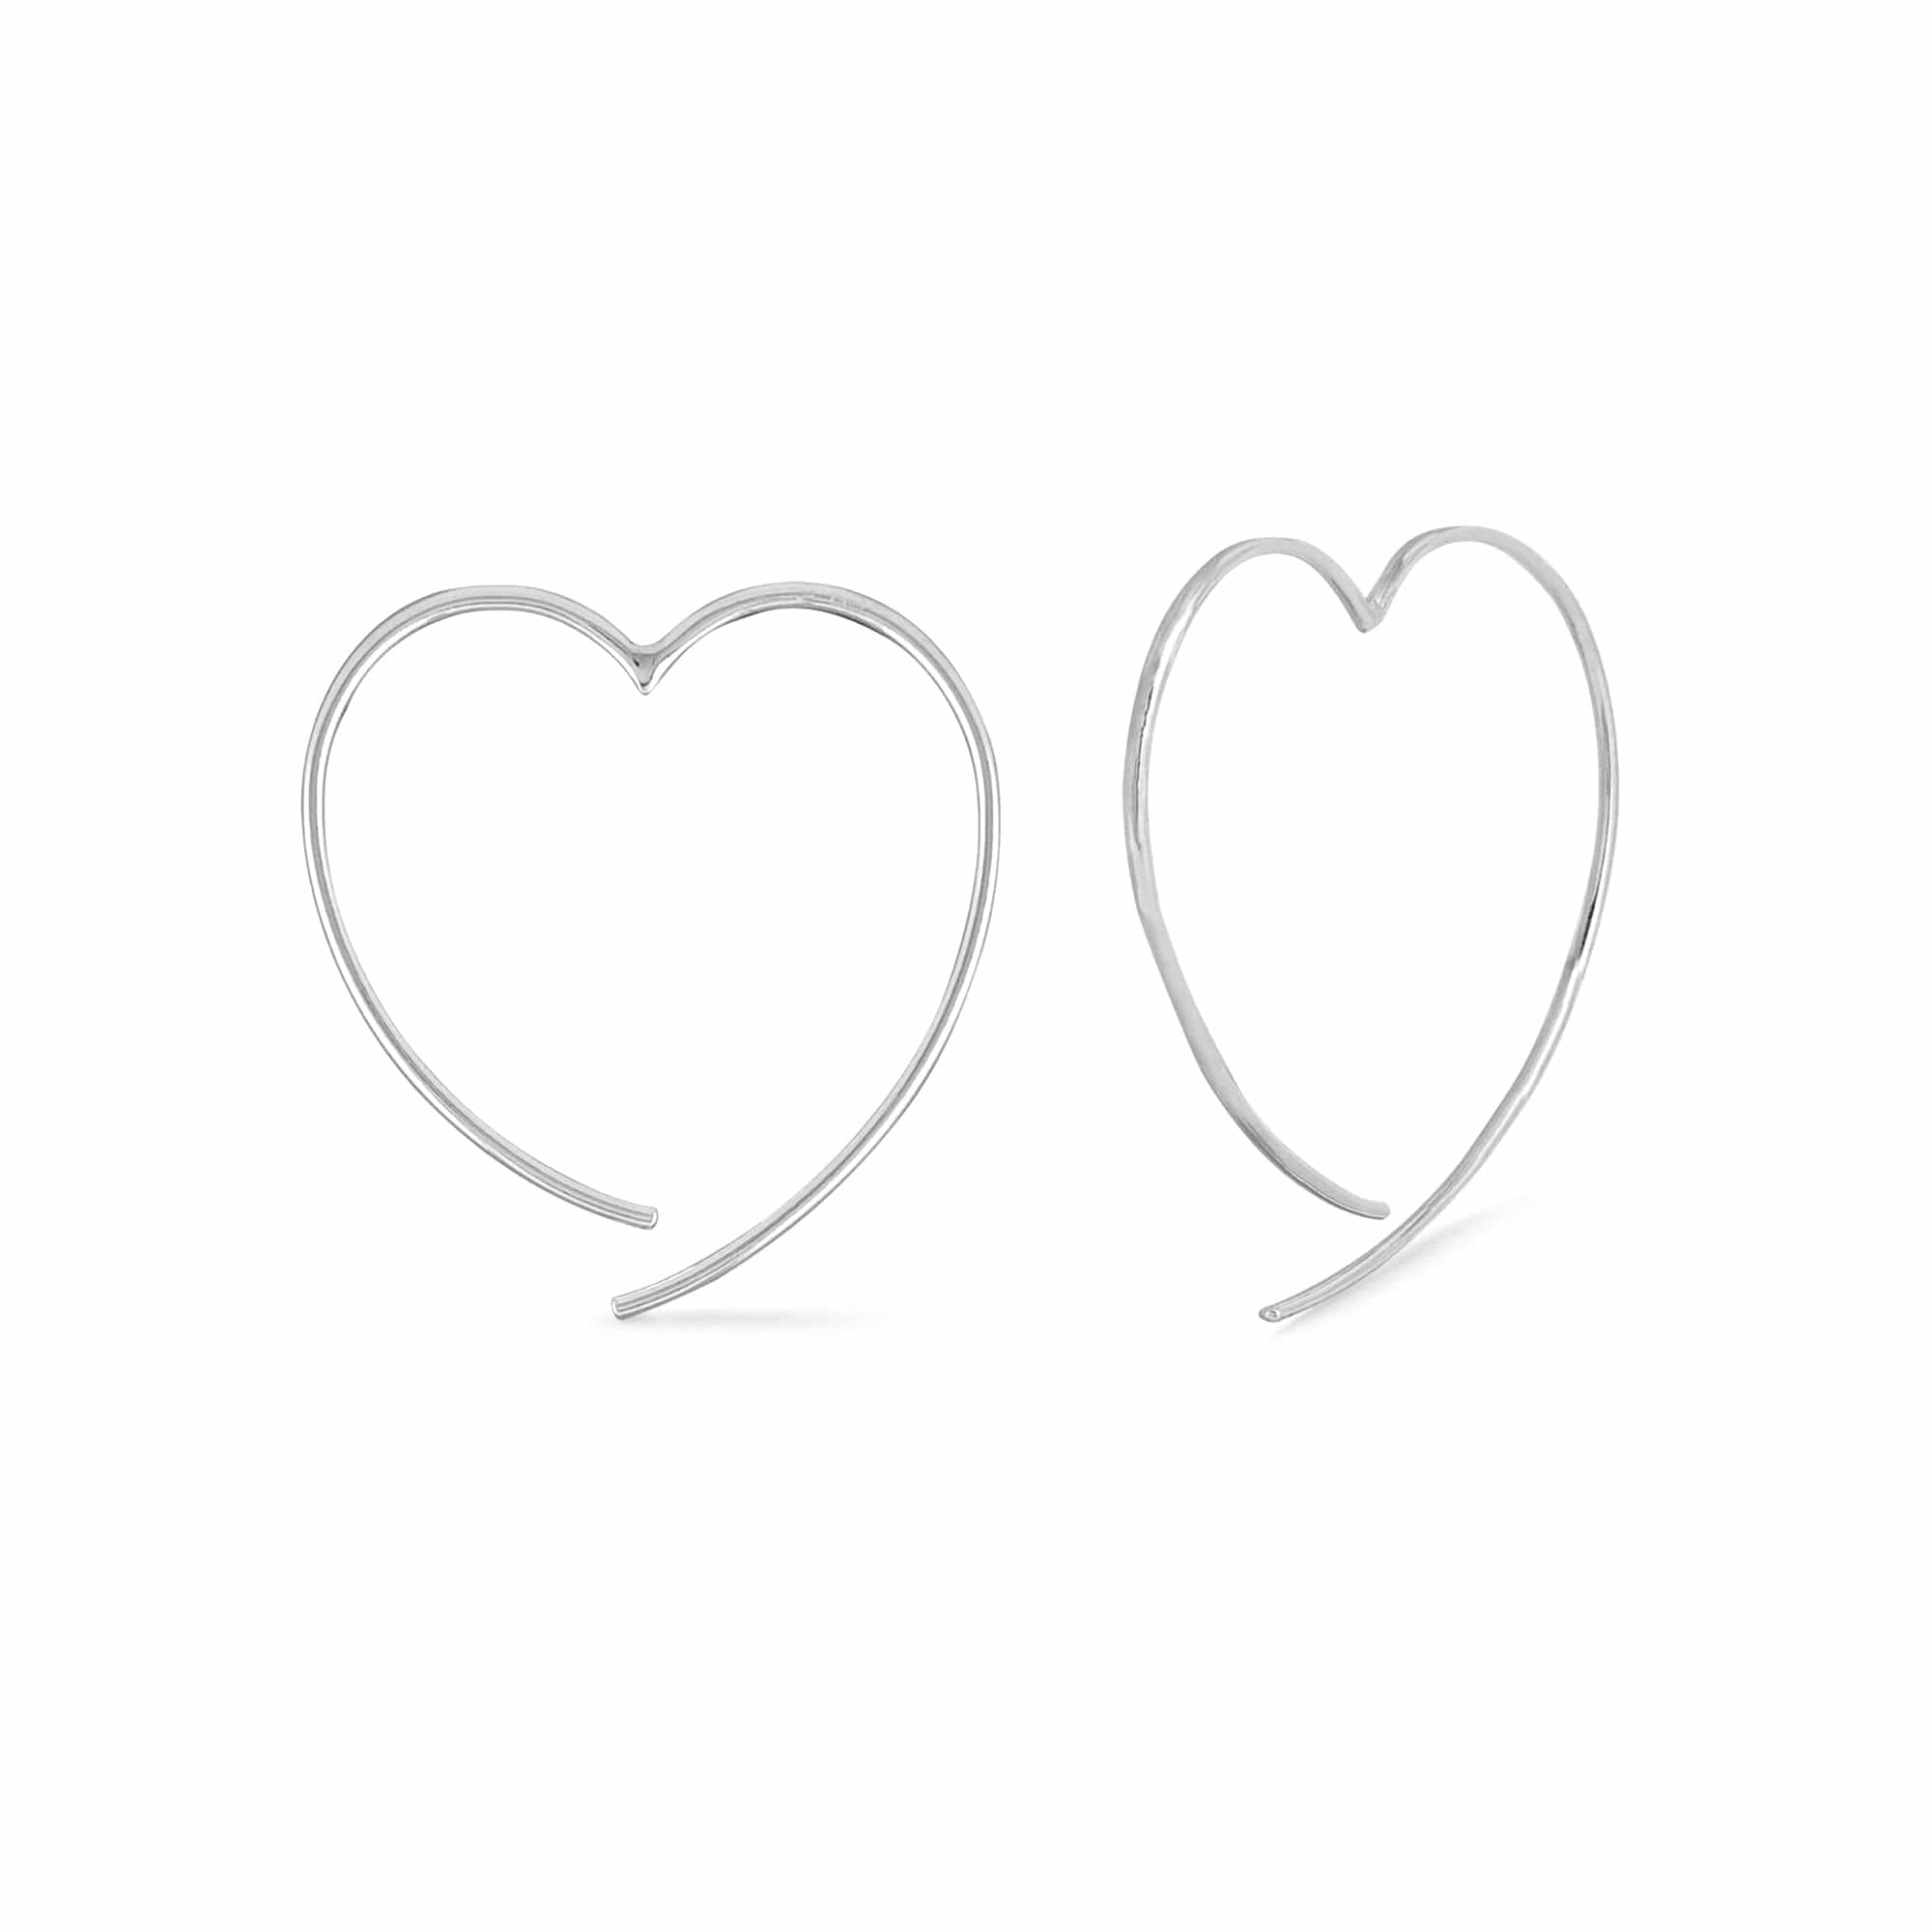 Boma Jewelry Earrings Sterling Silver / 1.5" Heart Pull Through Hoops